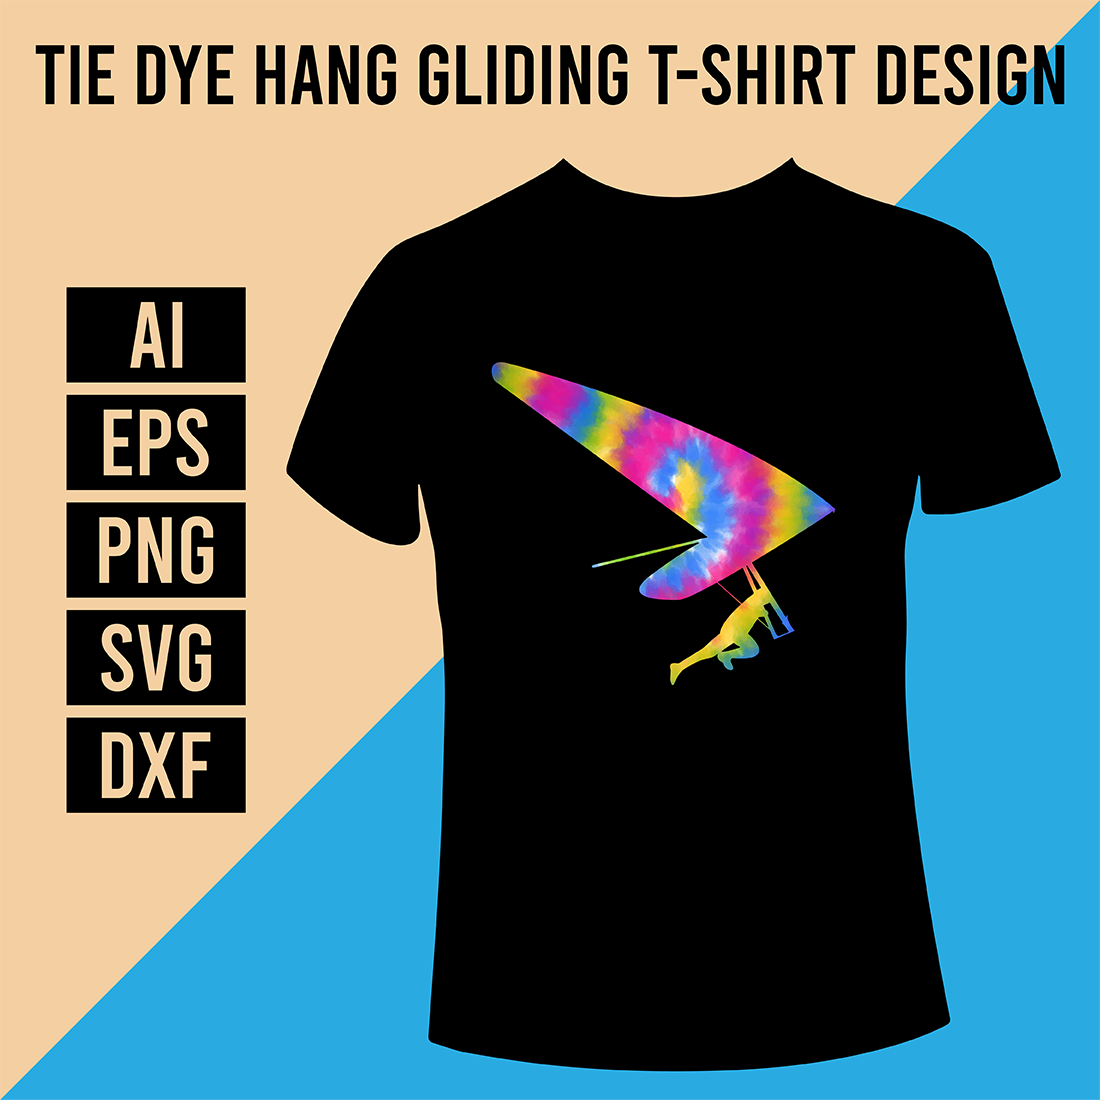 T - shirt design with a tie dye flying bird.